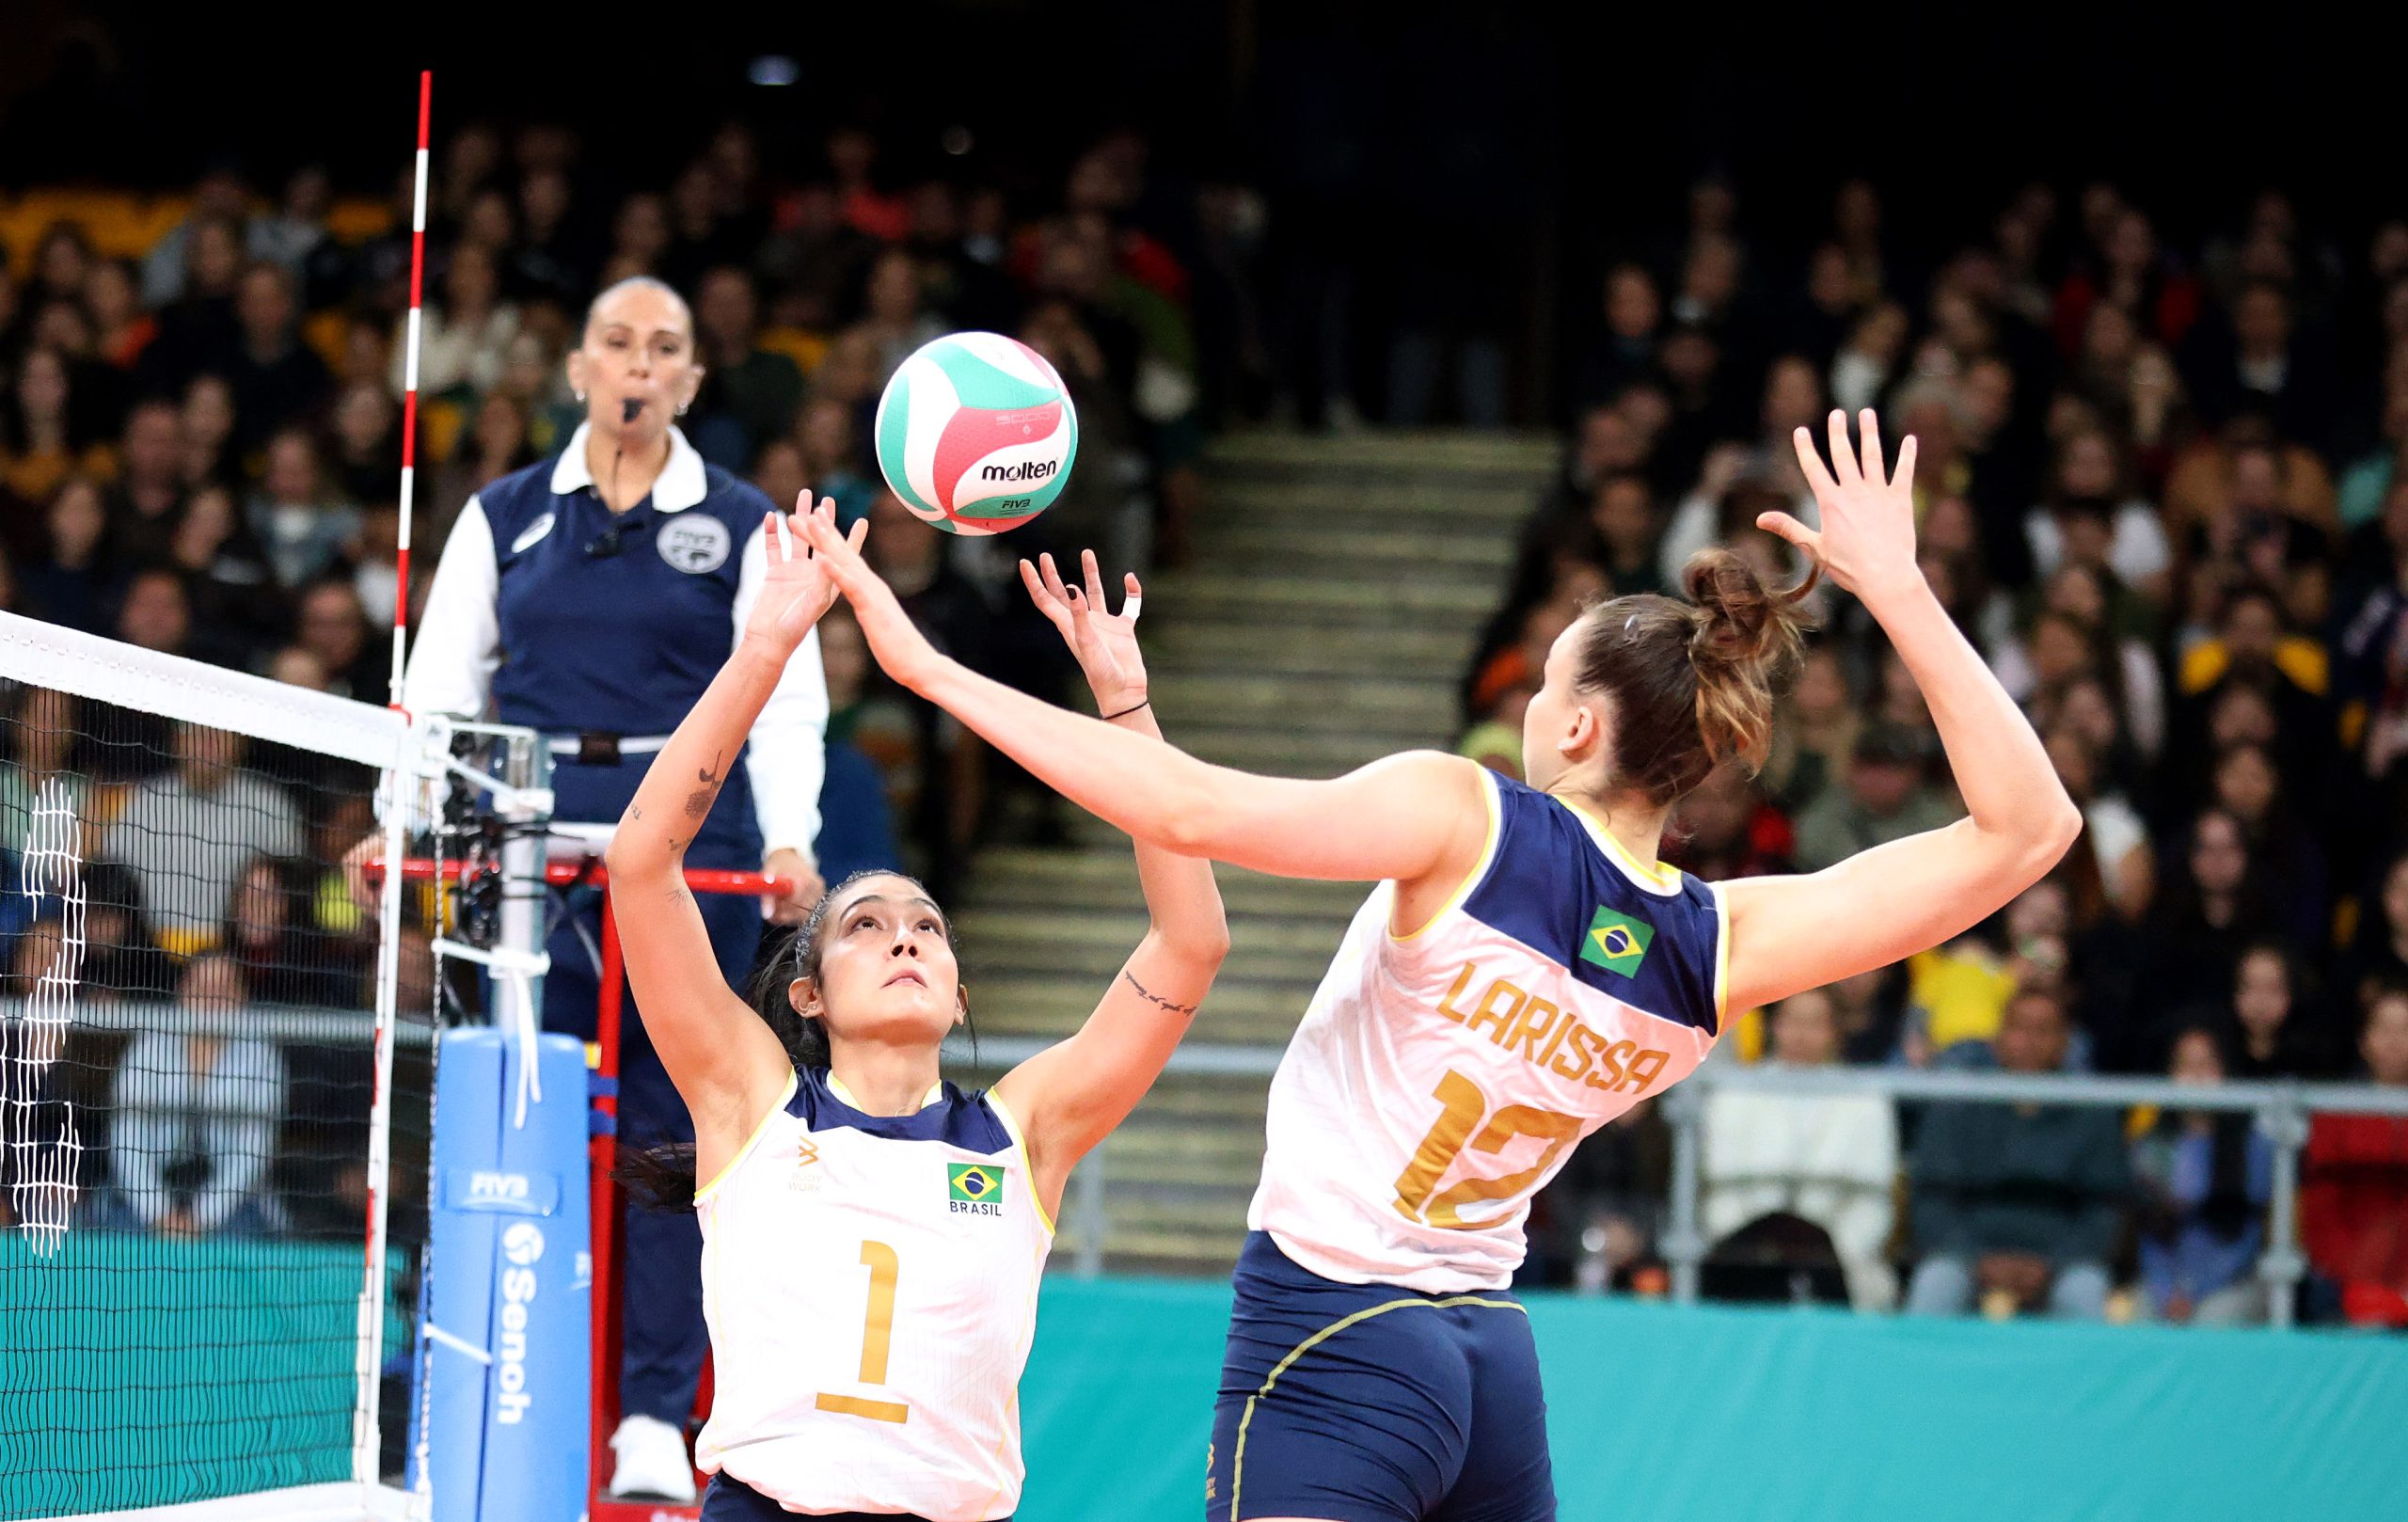 Brazil wins Group A undefeated and advances to Semifinals at Santiago 2023